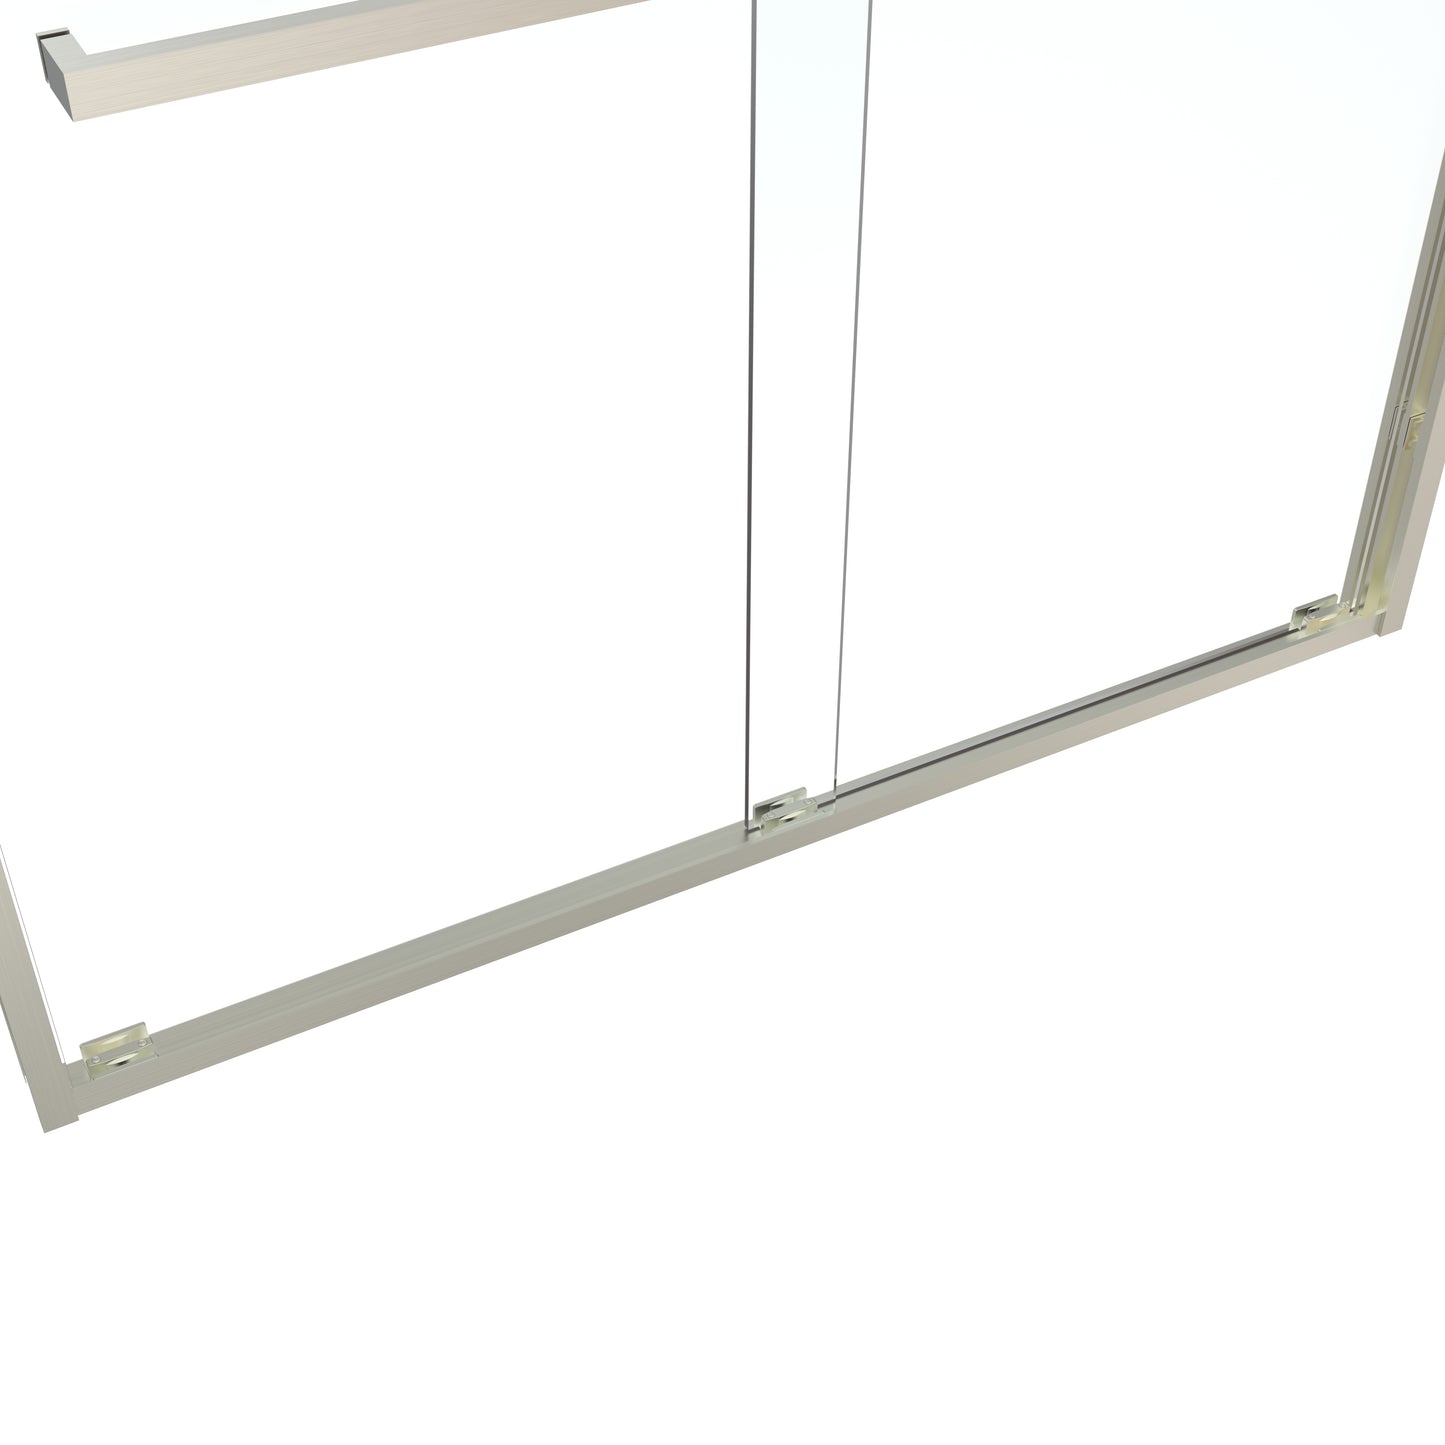 Waterpar® 56 in. to 60 in. W x 76 in. H Semi-Frameless Sliding Shower Door Brushed Nickel with Clear Glass